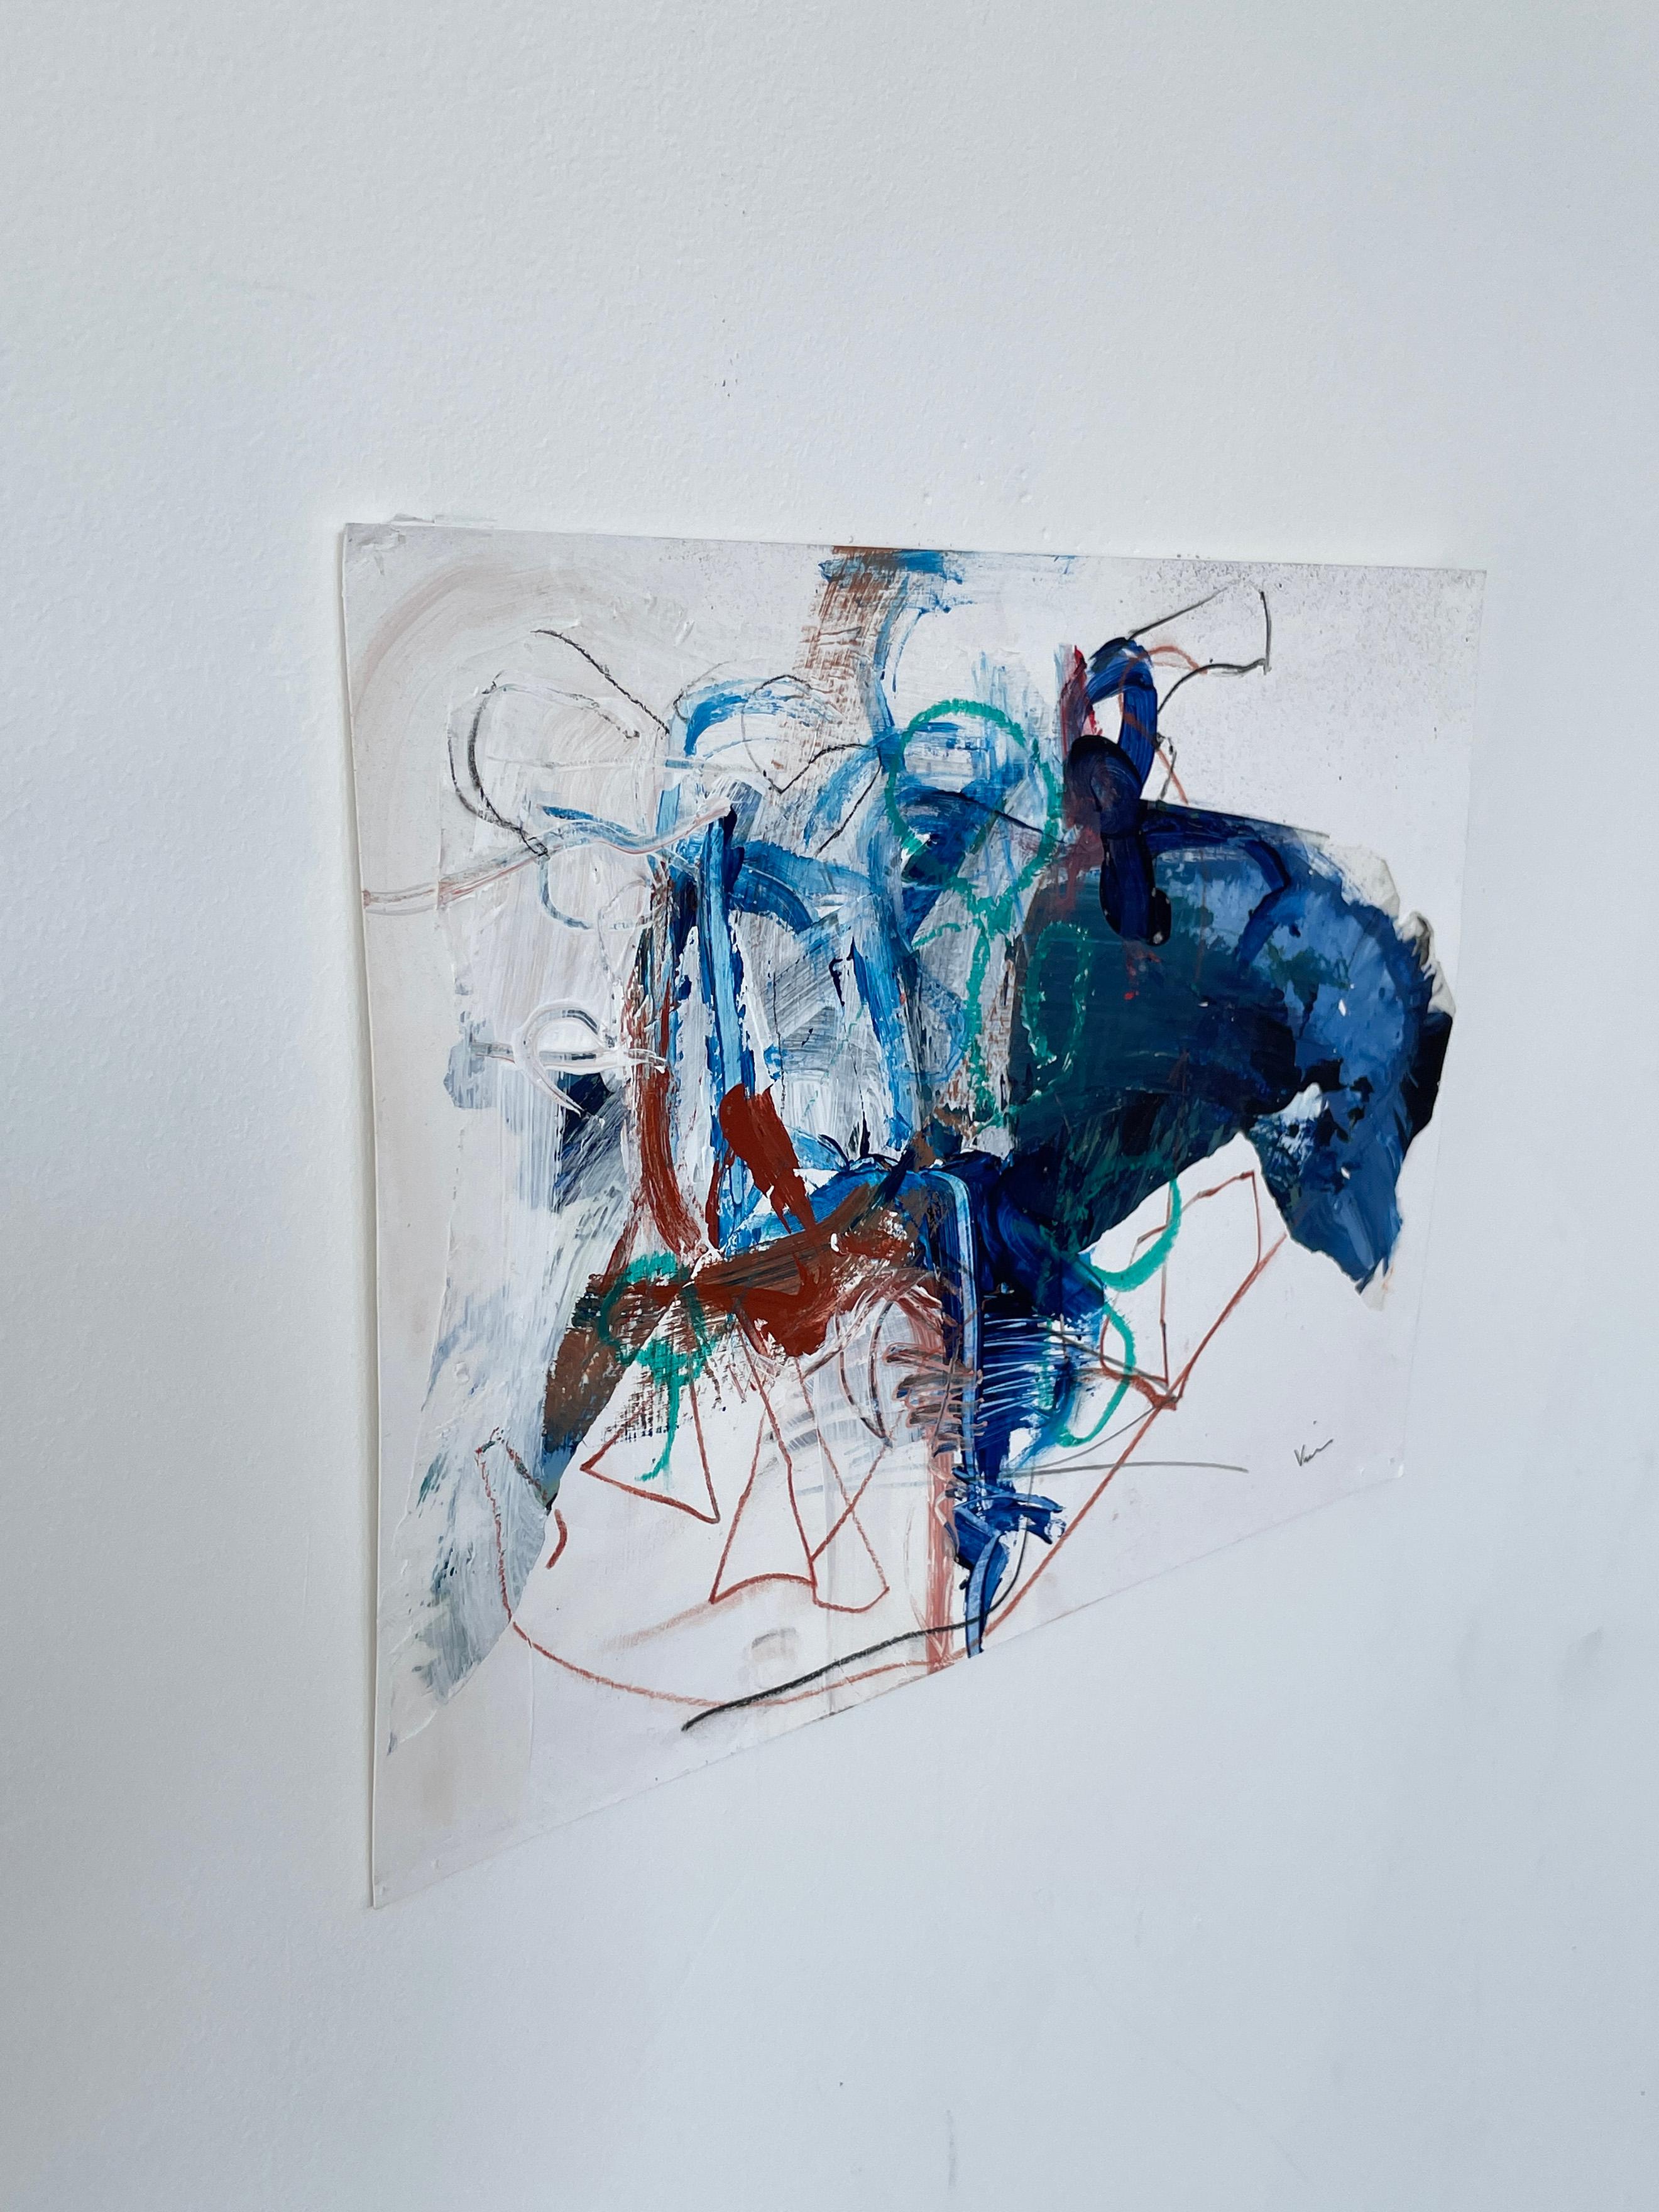 Small Works on Paper, Untitled #18 - Abstract Painting by Stephanie Visser 